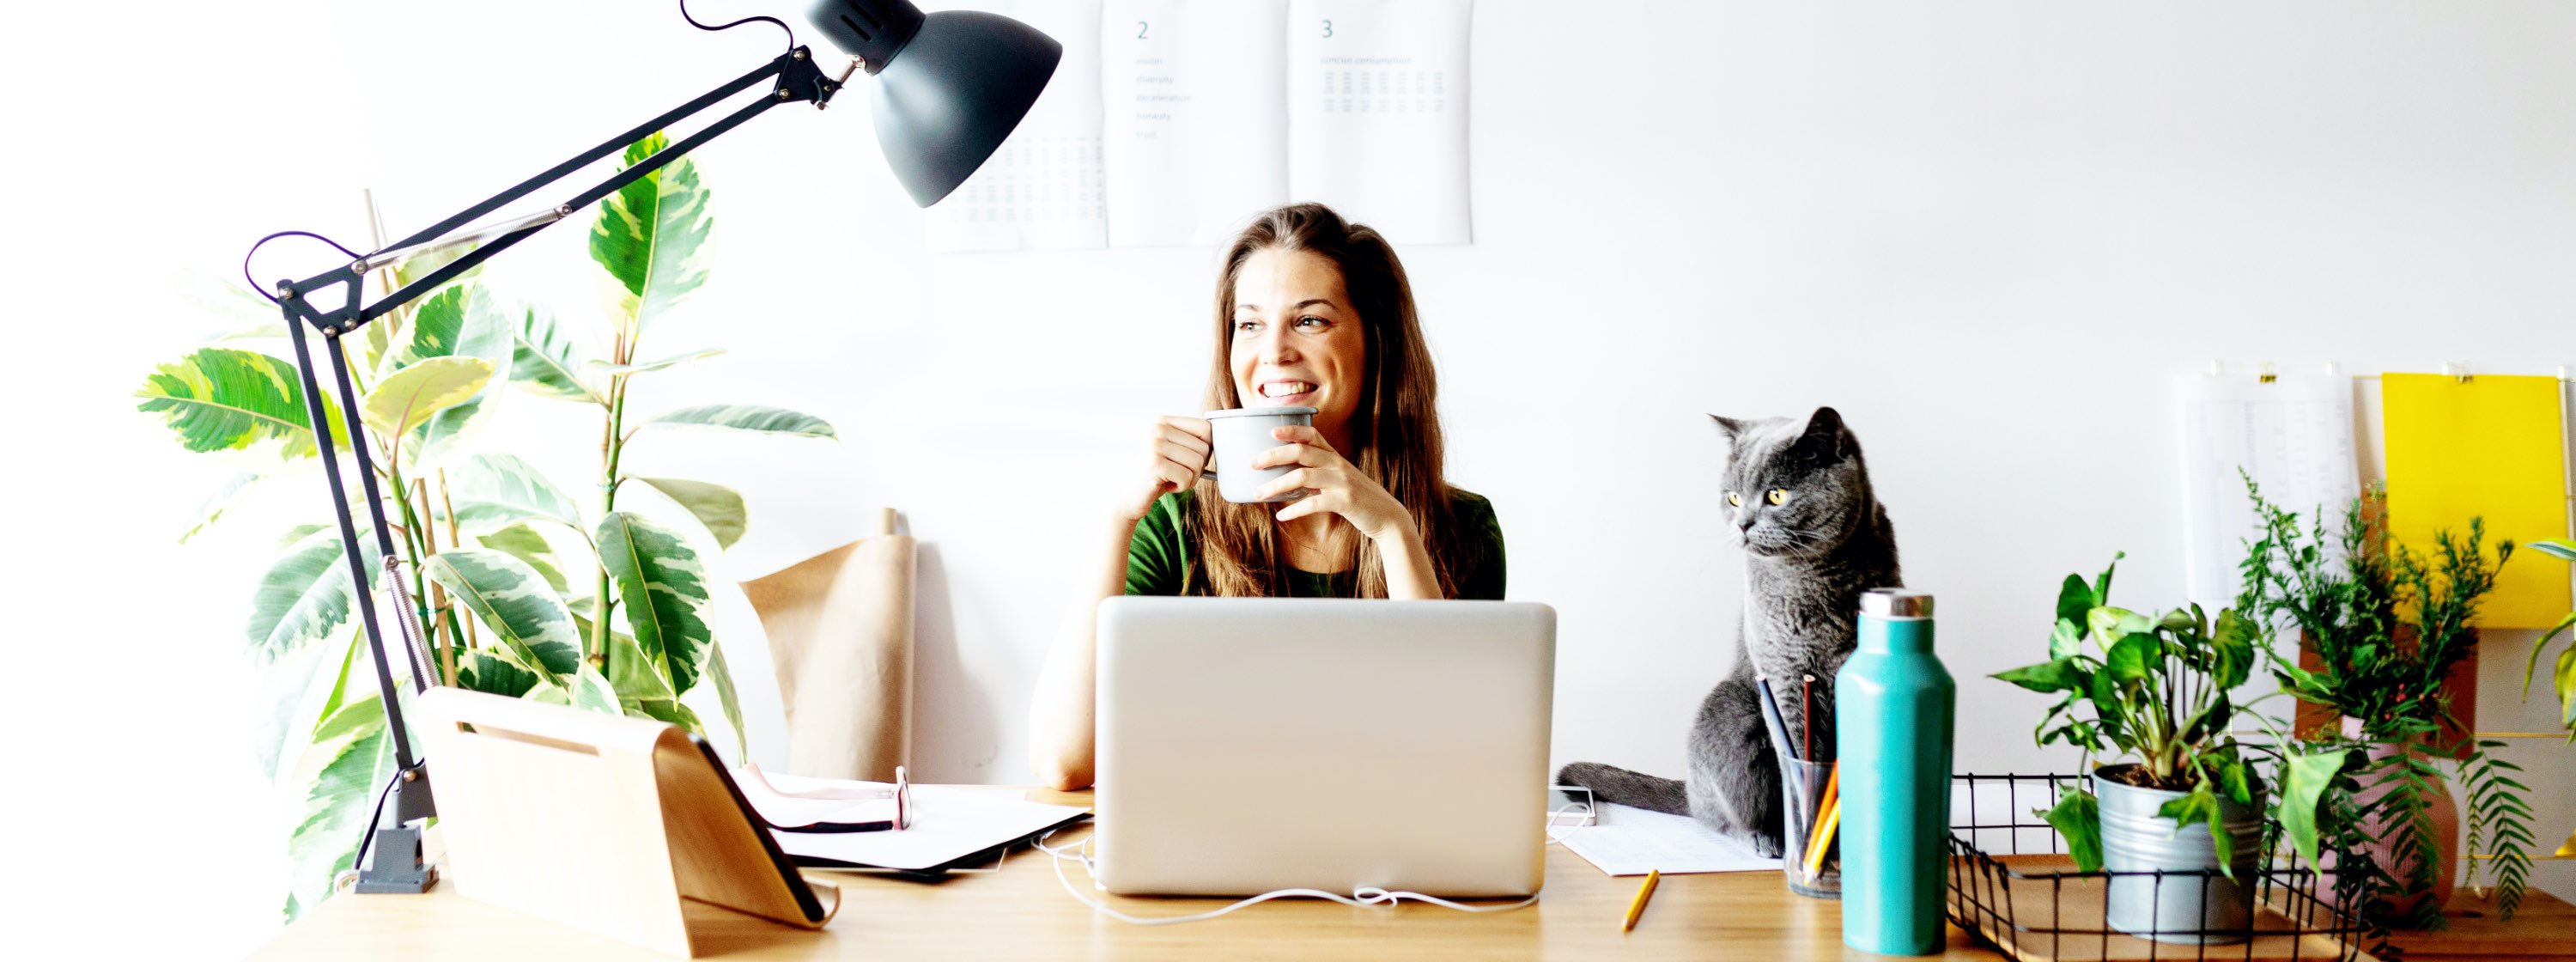 smiling woman sitting at her home office desk, holding a coffee mug, surrounded by plants with her cat on the desk beside her